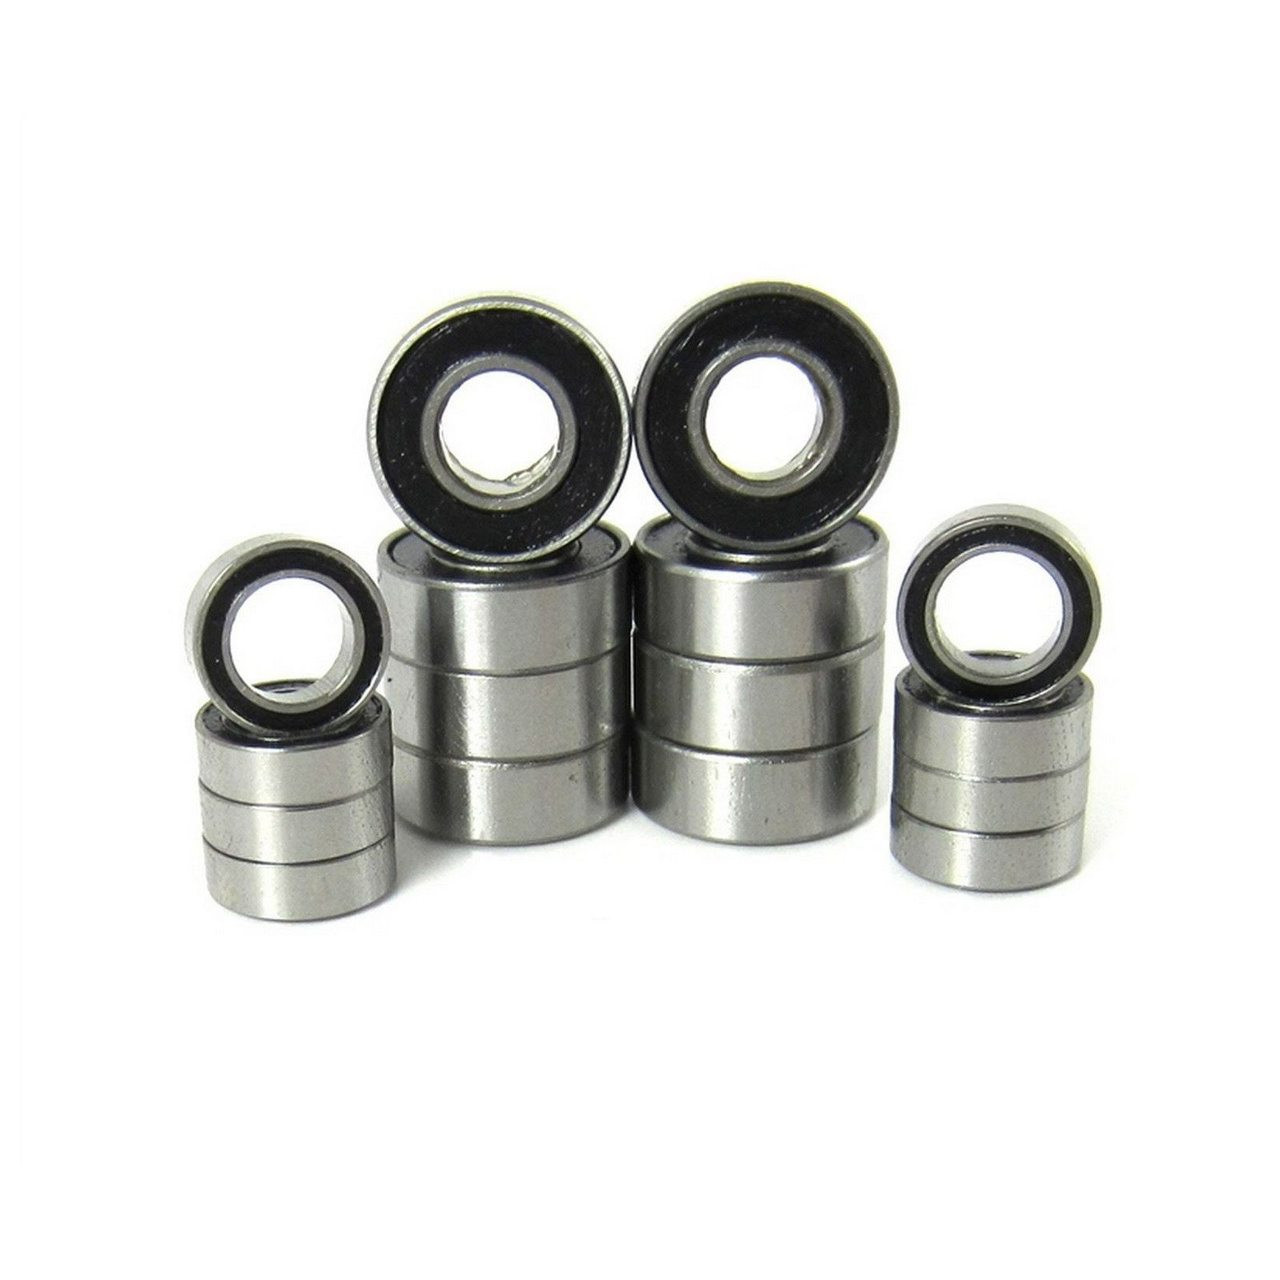 TRB RC Precision Ball Bearing Kit (16) Rubber Sealed for Traxxas Bandit XL-5